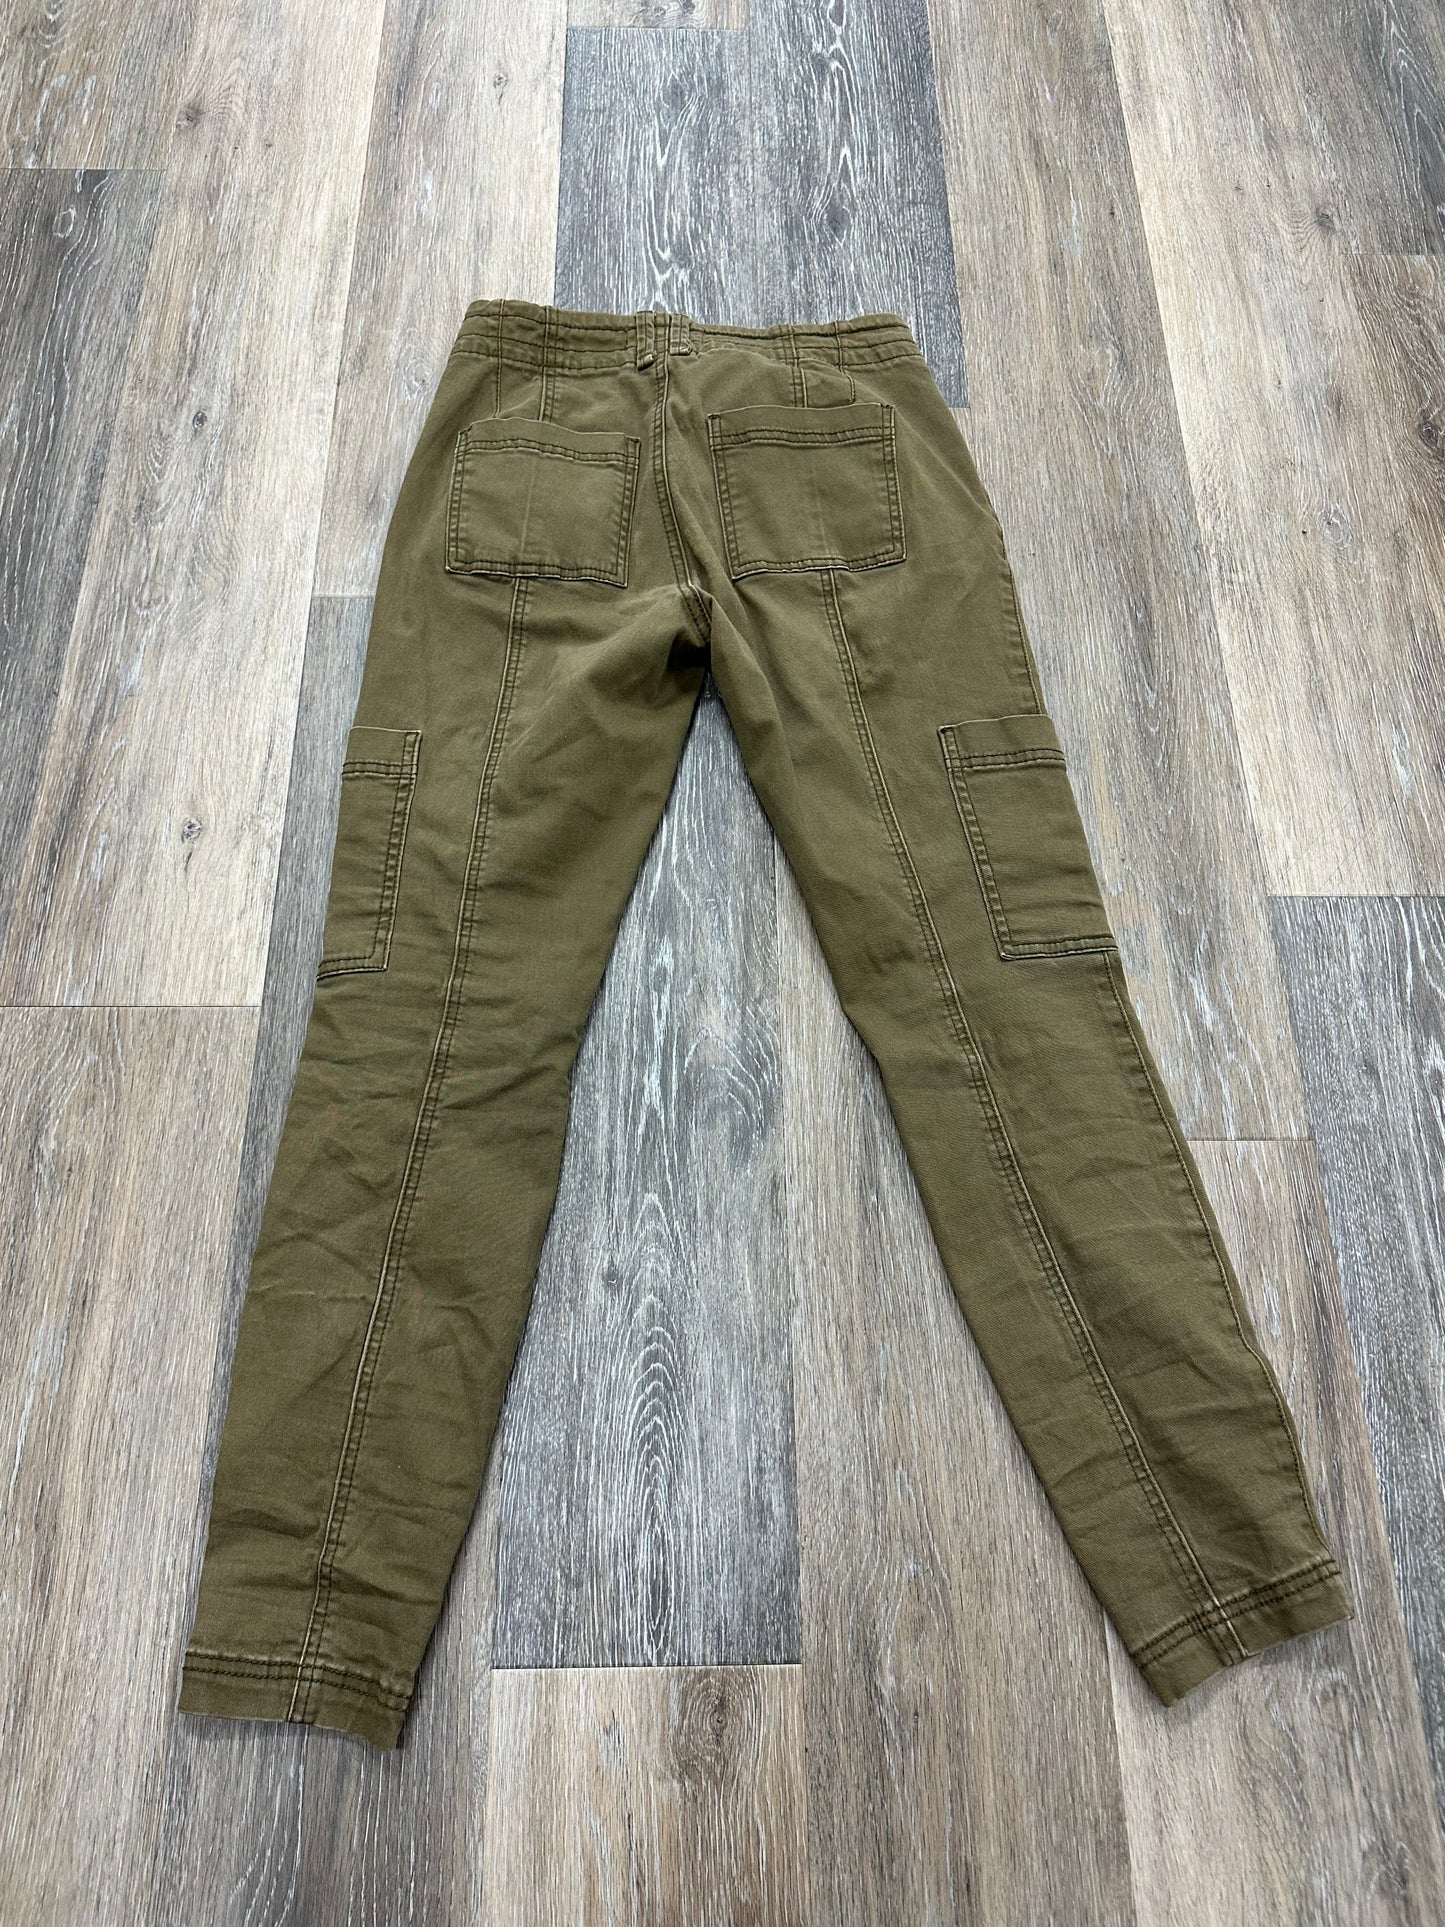 Pants Cargo & Utility By Anthropologie  Size: 4